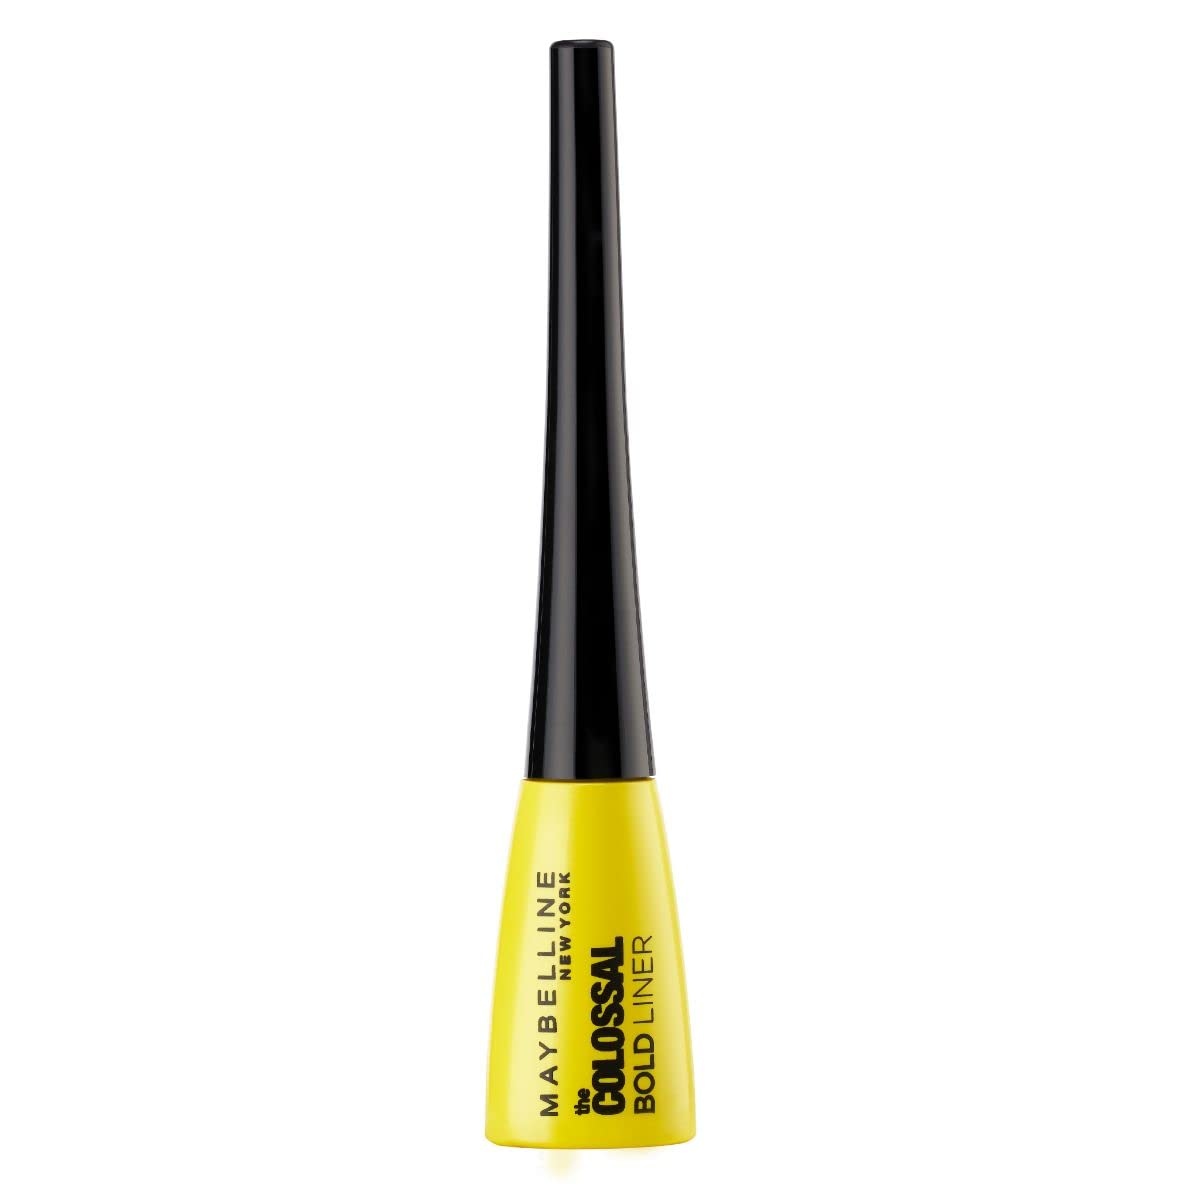 Maybelline New York’s Colossal Bold Liner has a waterproof and smudge-proof formula that can last up to 24 hours giving you the perfect bold eye look.